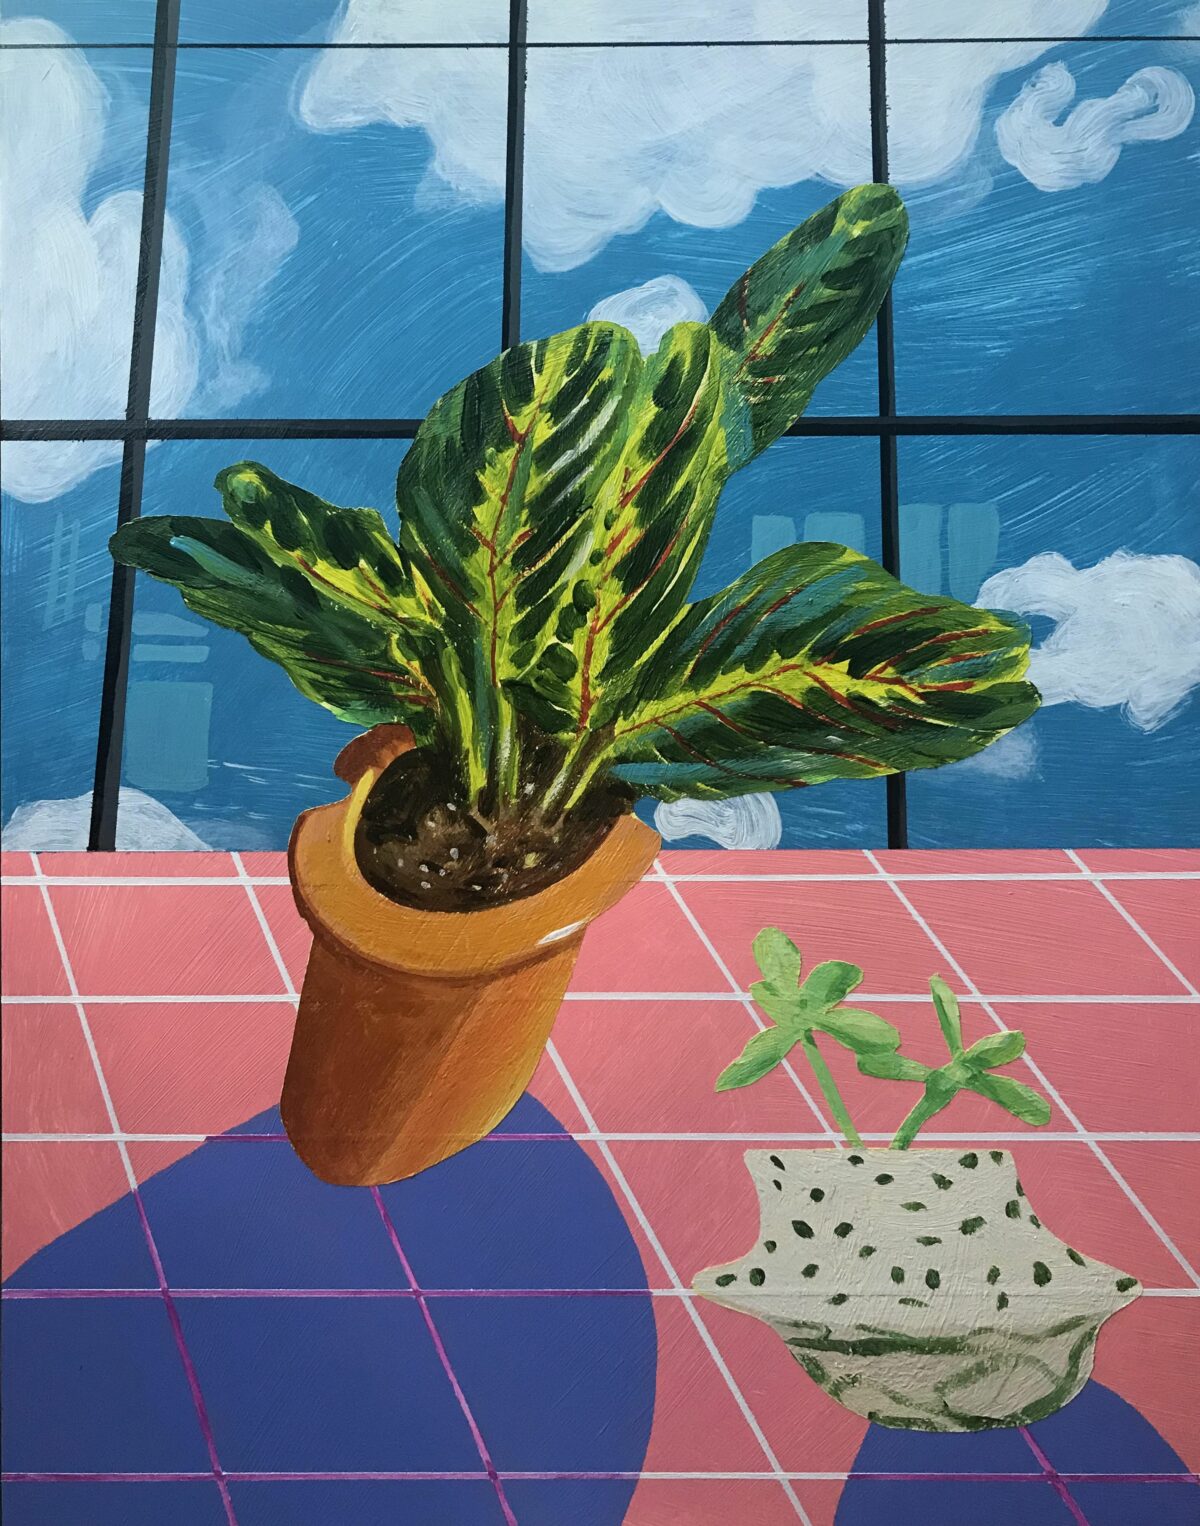 Playing With Perspectives Splendid Paintings Of Home Spaces By Sierra Montoya Barela 11